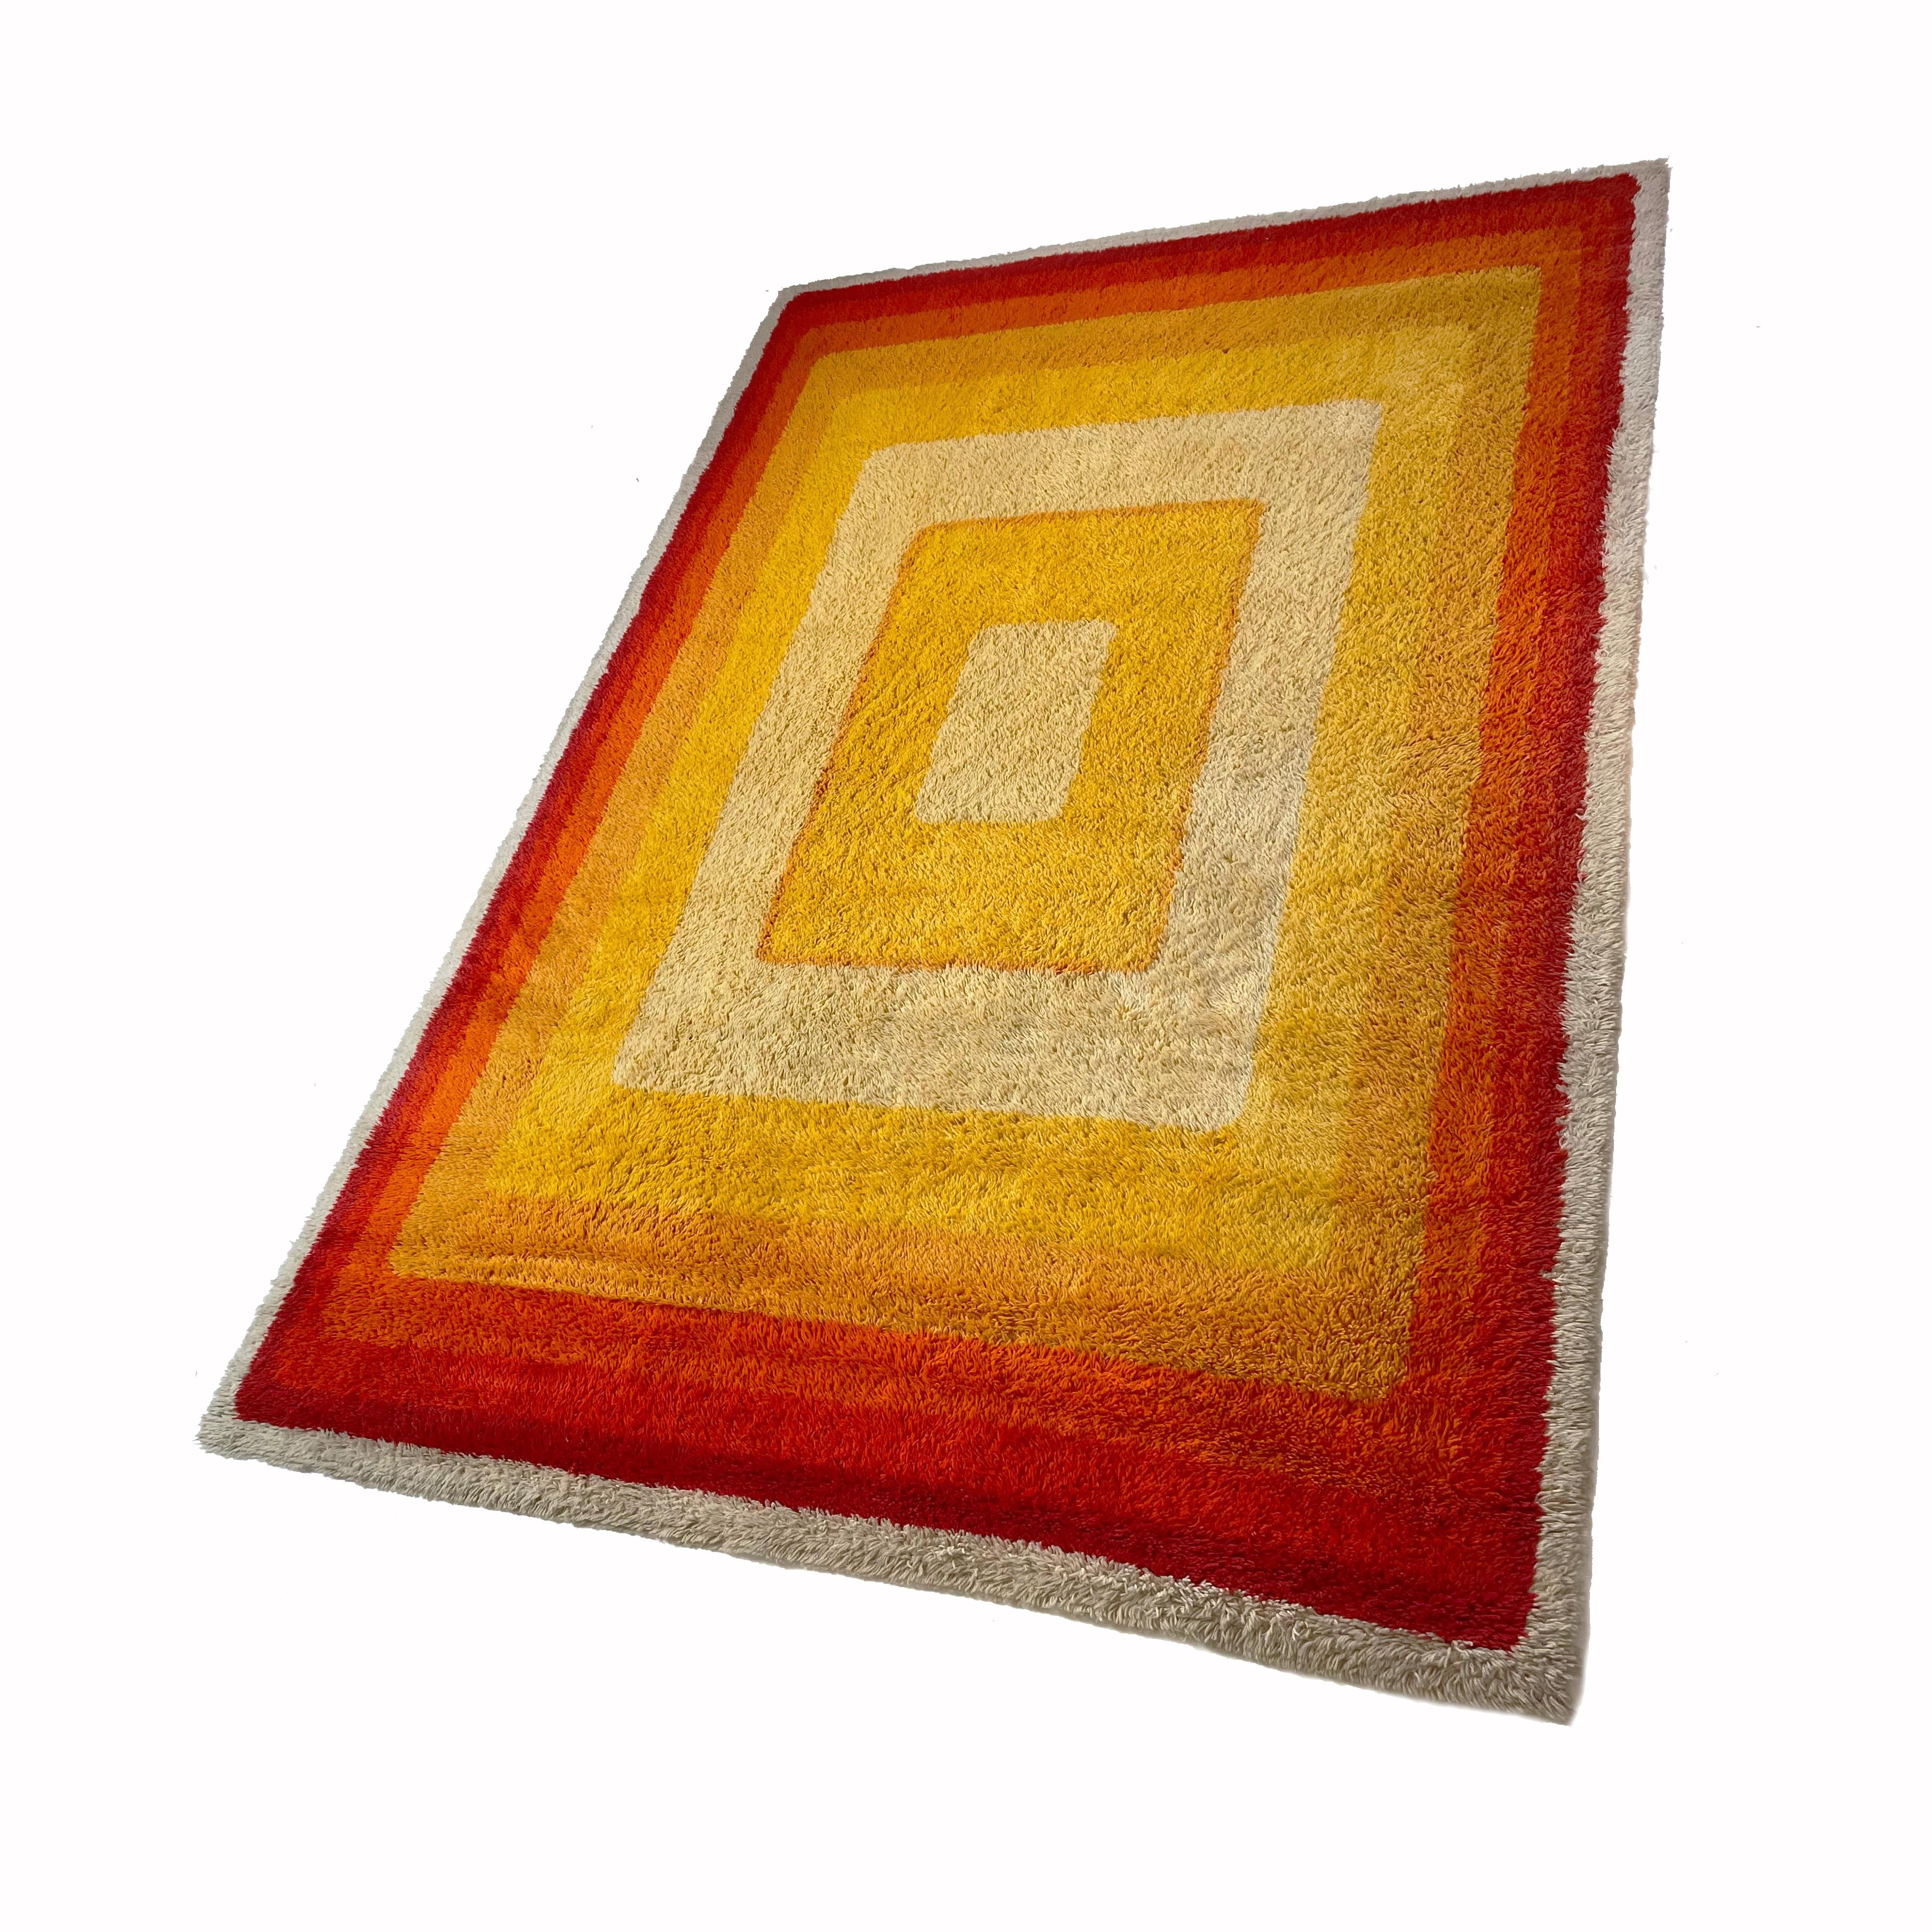 70s style rug